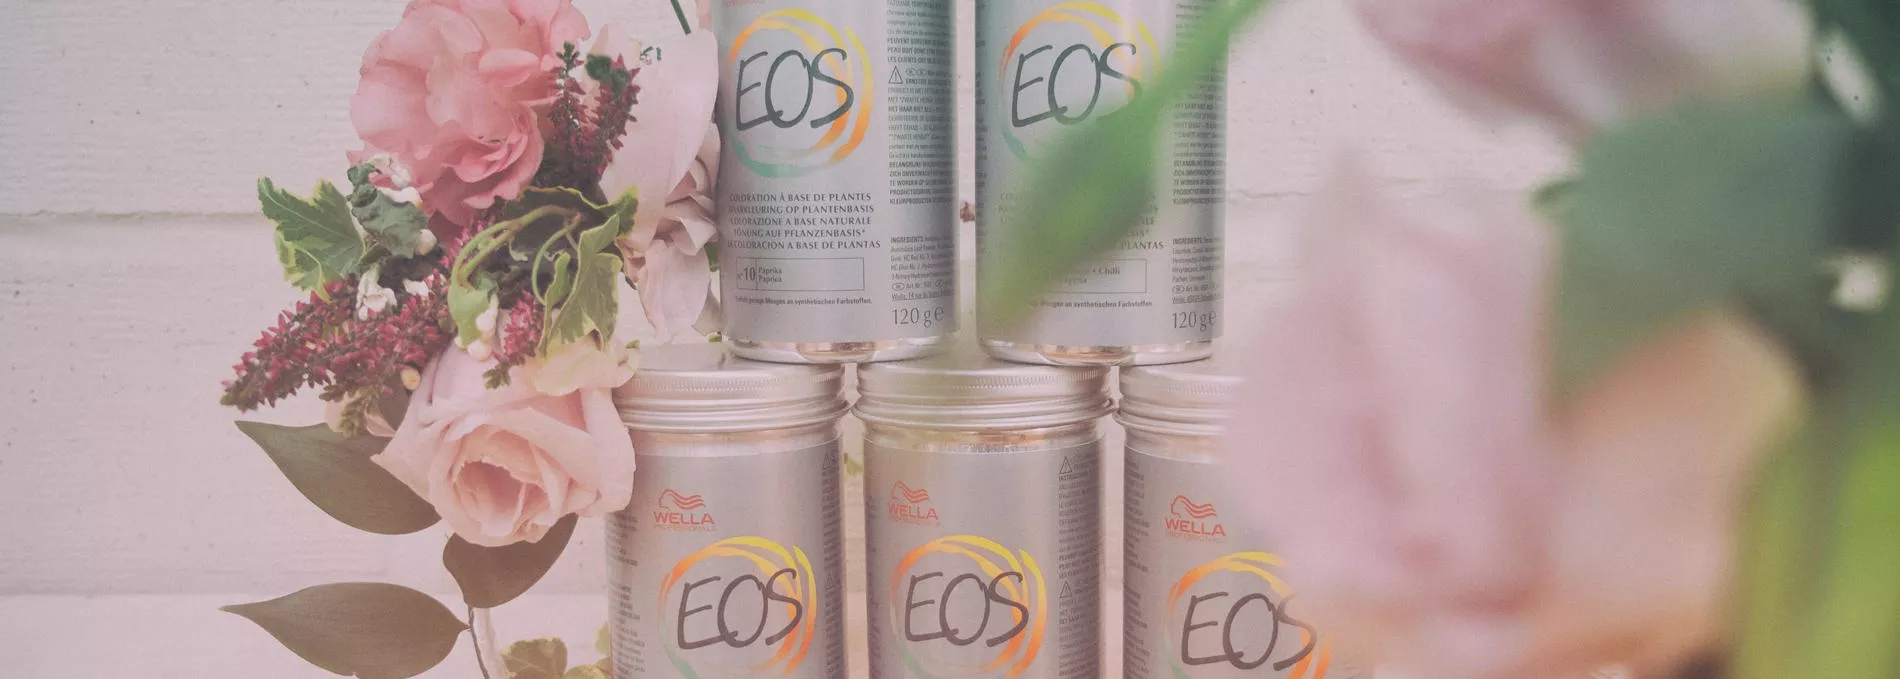 Five silver EOS plant based hair dye cans stacked up on top of each other, next to pink flowers.